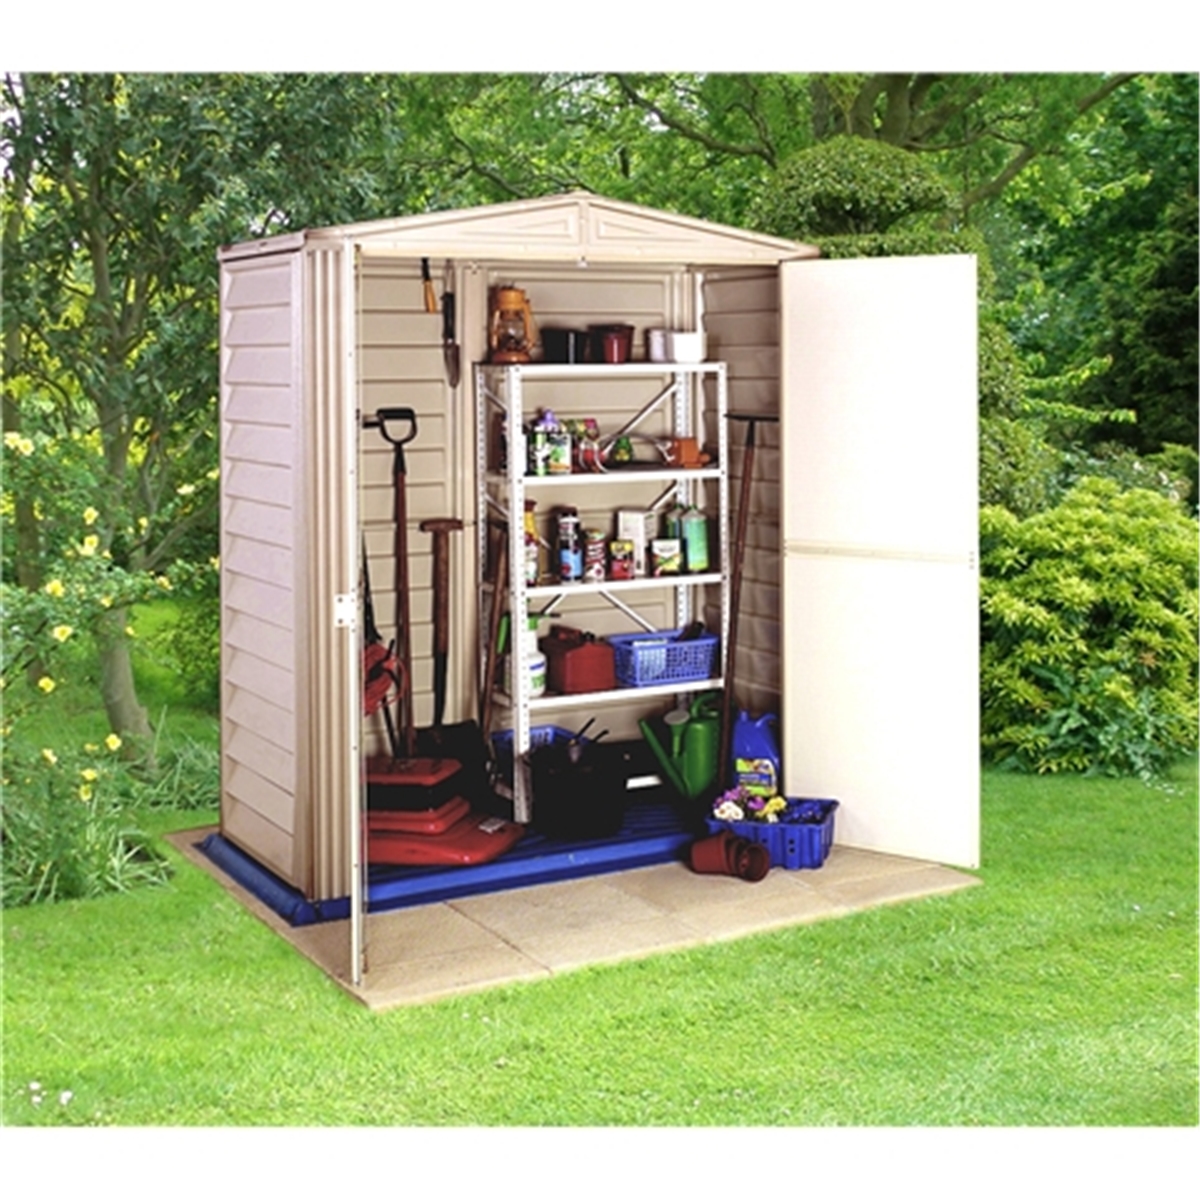 disco 09/07/20 5 x 3 select duramax plastic pvc shed with